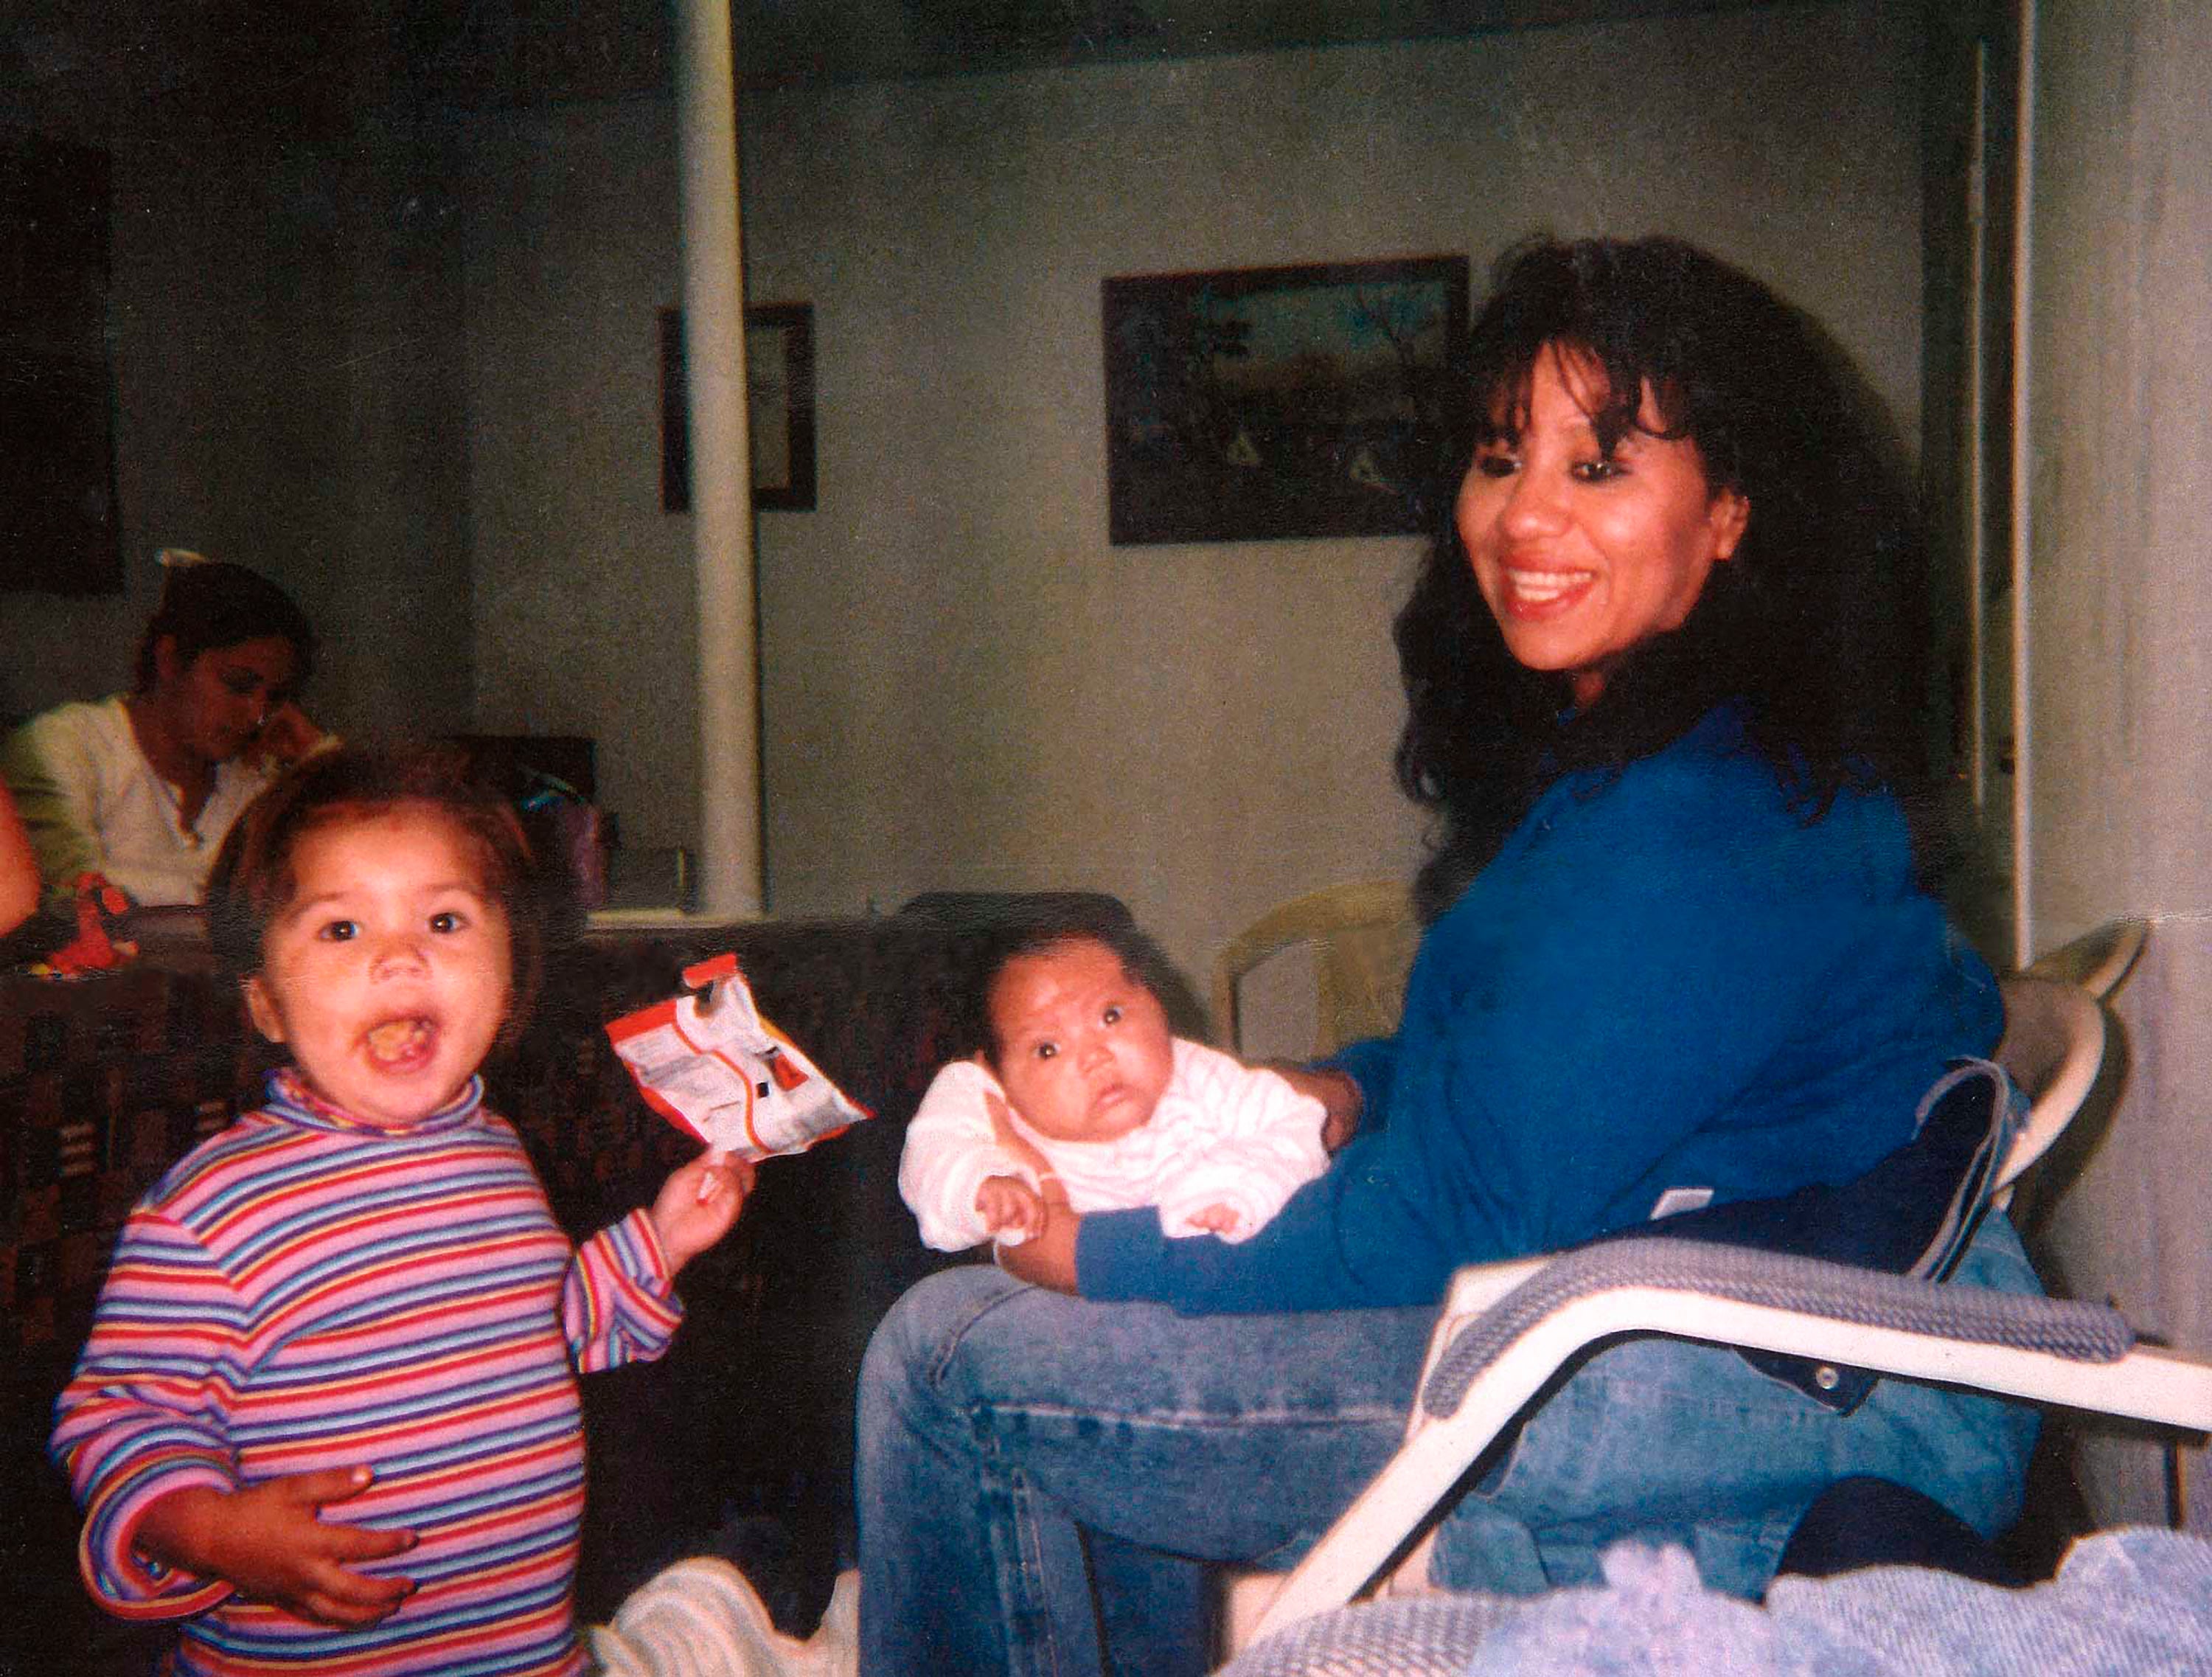 In this undated photo, Melissa Lucio holds her daughter Mariah, while her other child stands nearby